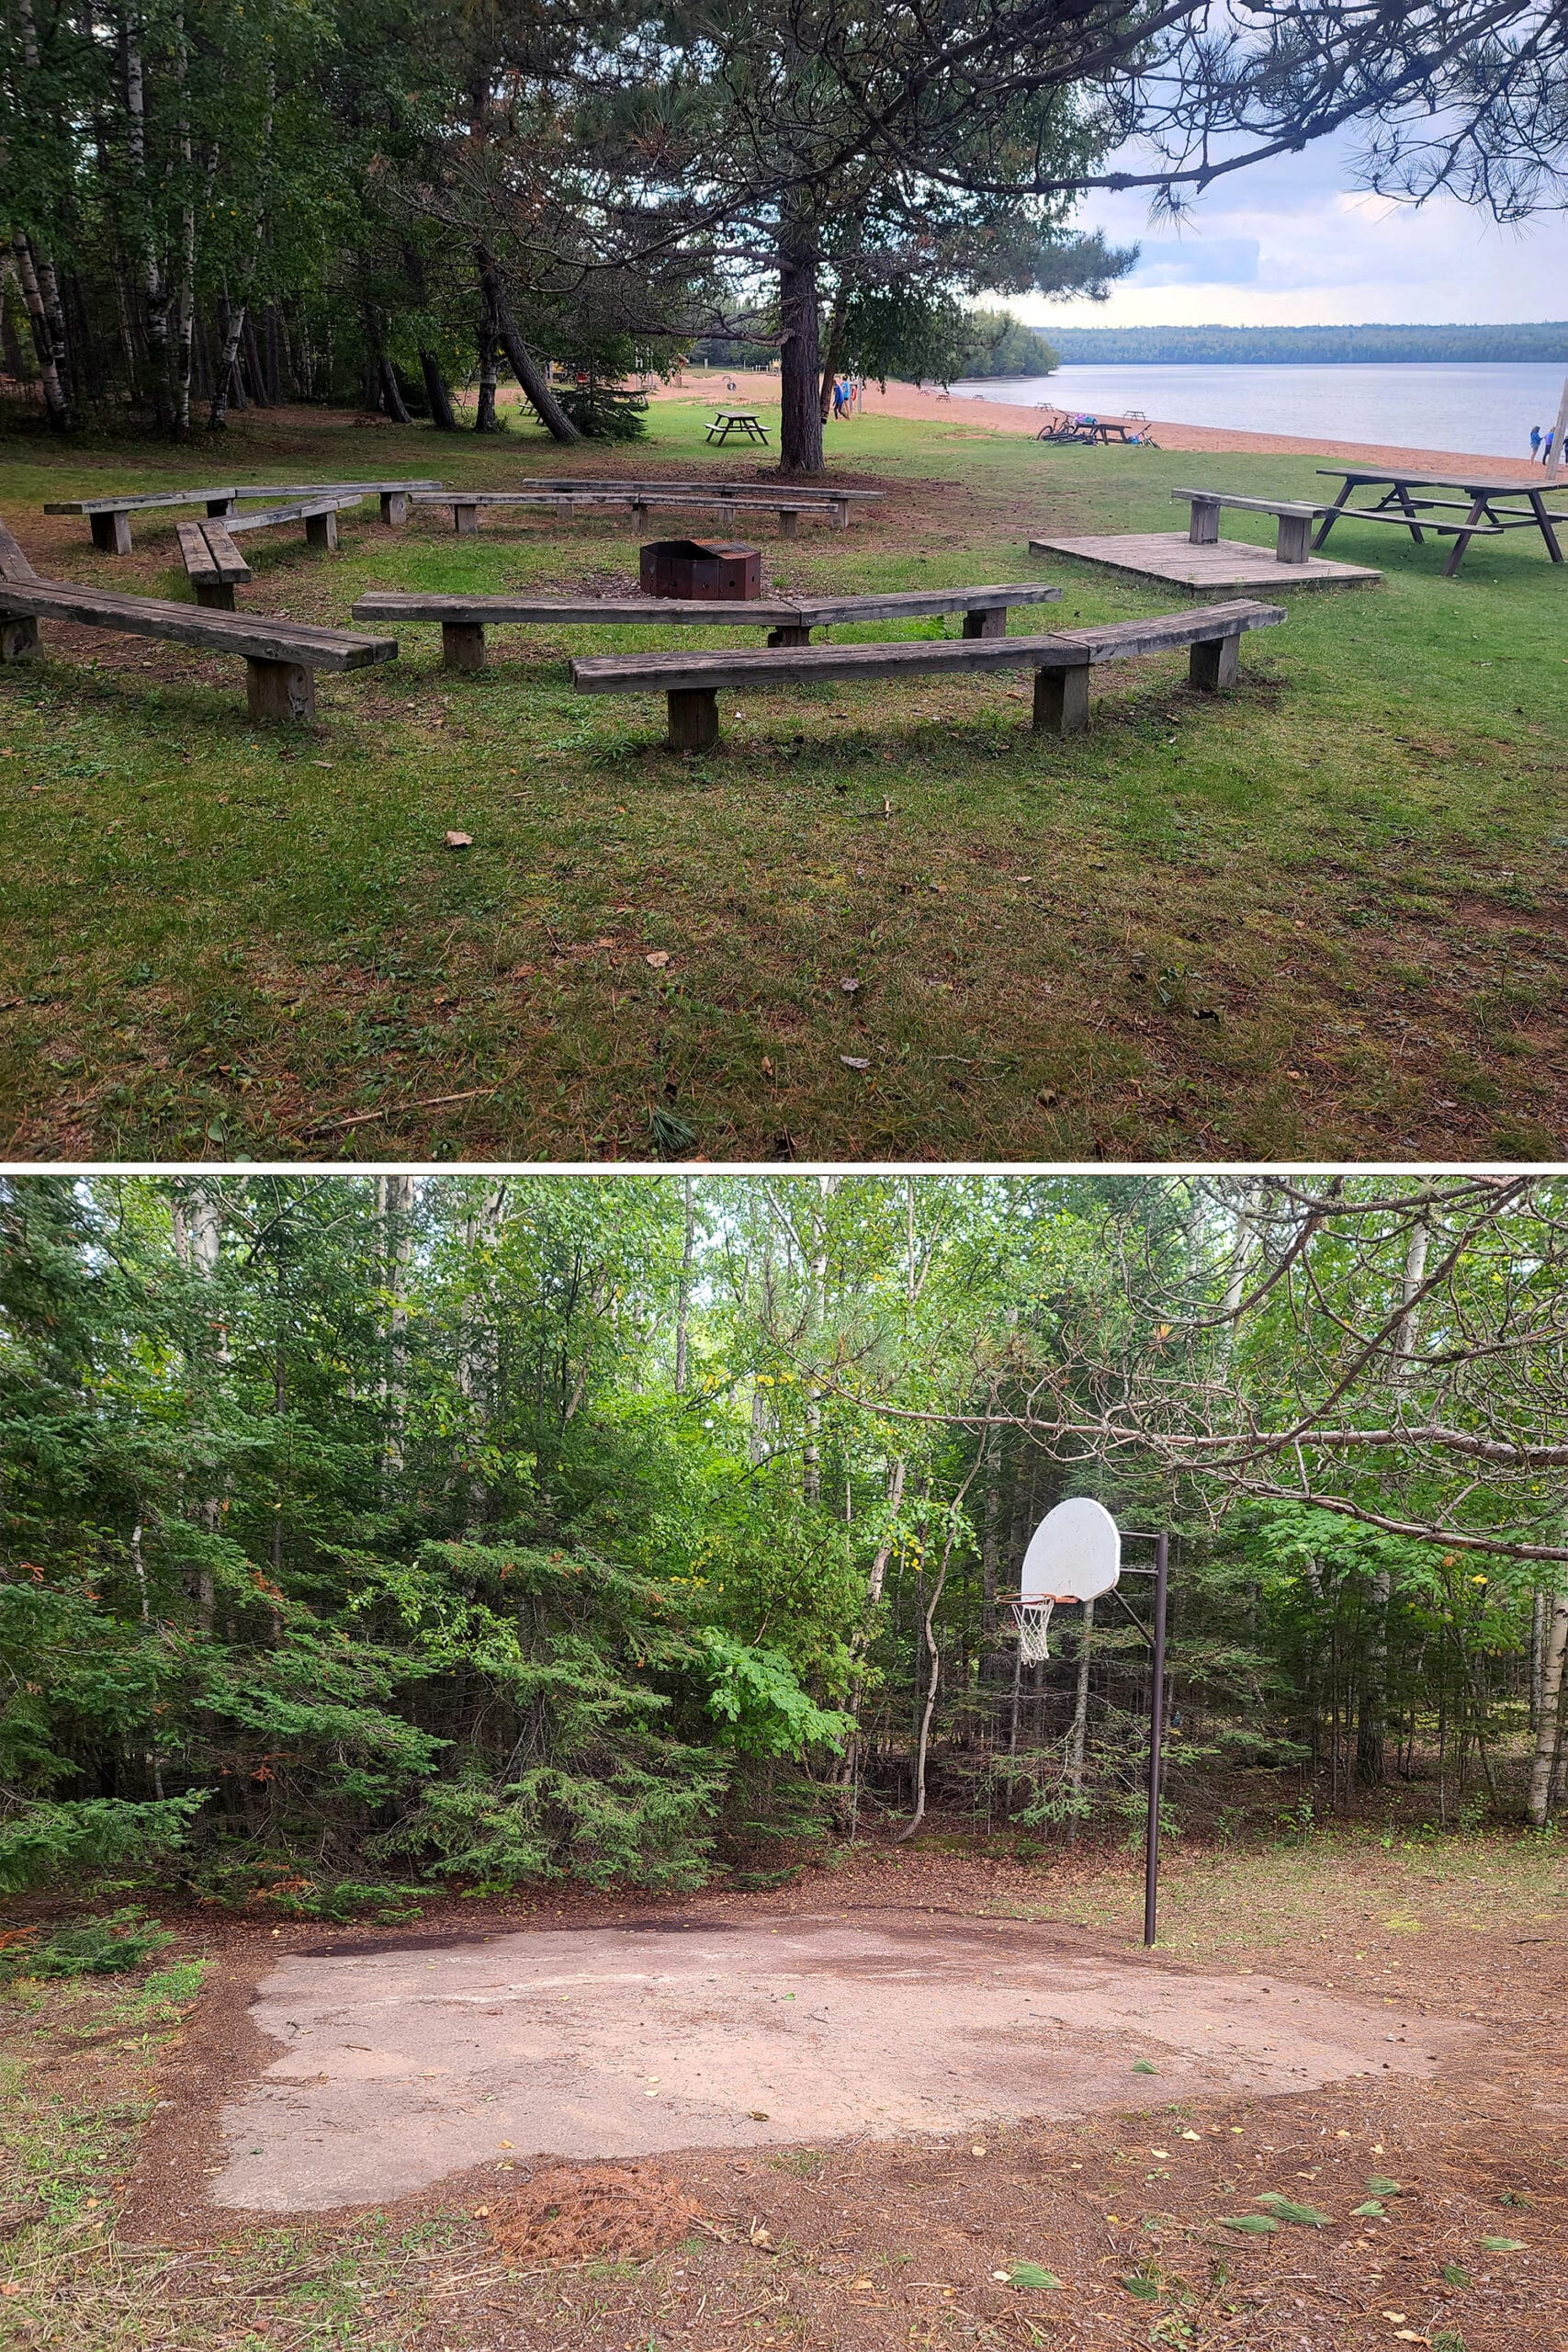 2 part image showing a small outdoor firepit theatre, and a small basketball court.